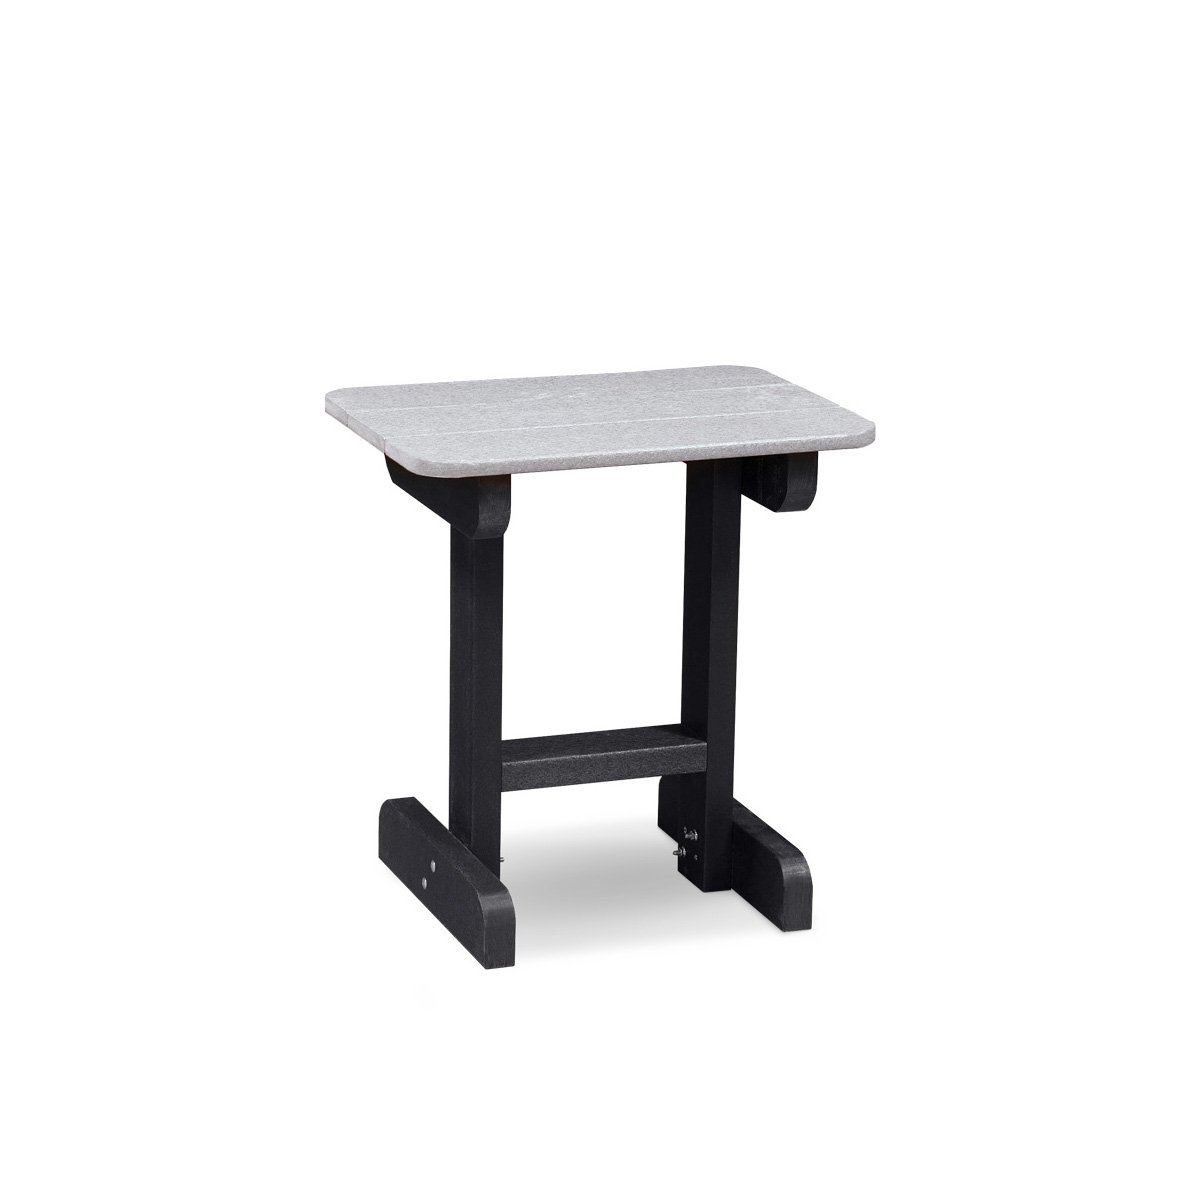 24 inch Recycled Poly End Table - Express Outdoor Furniture Simply Amish Grey and Black 